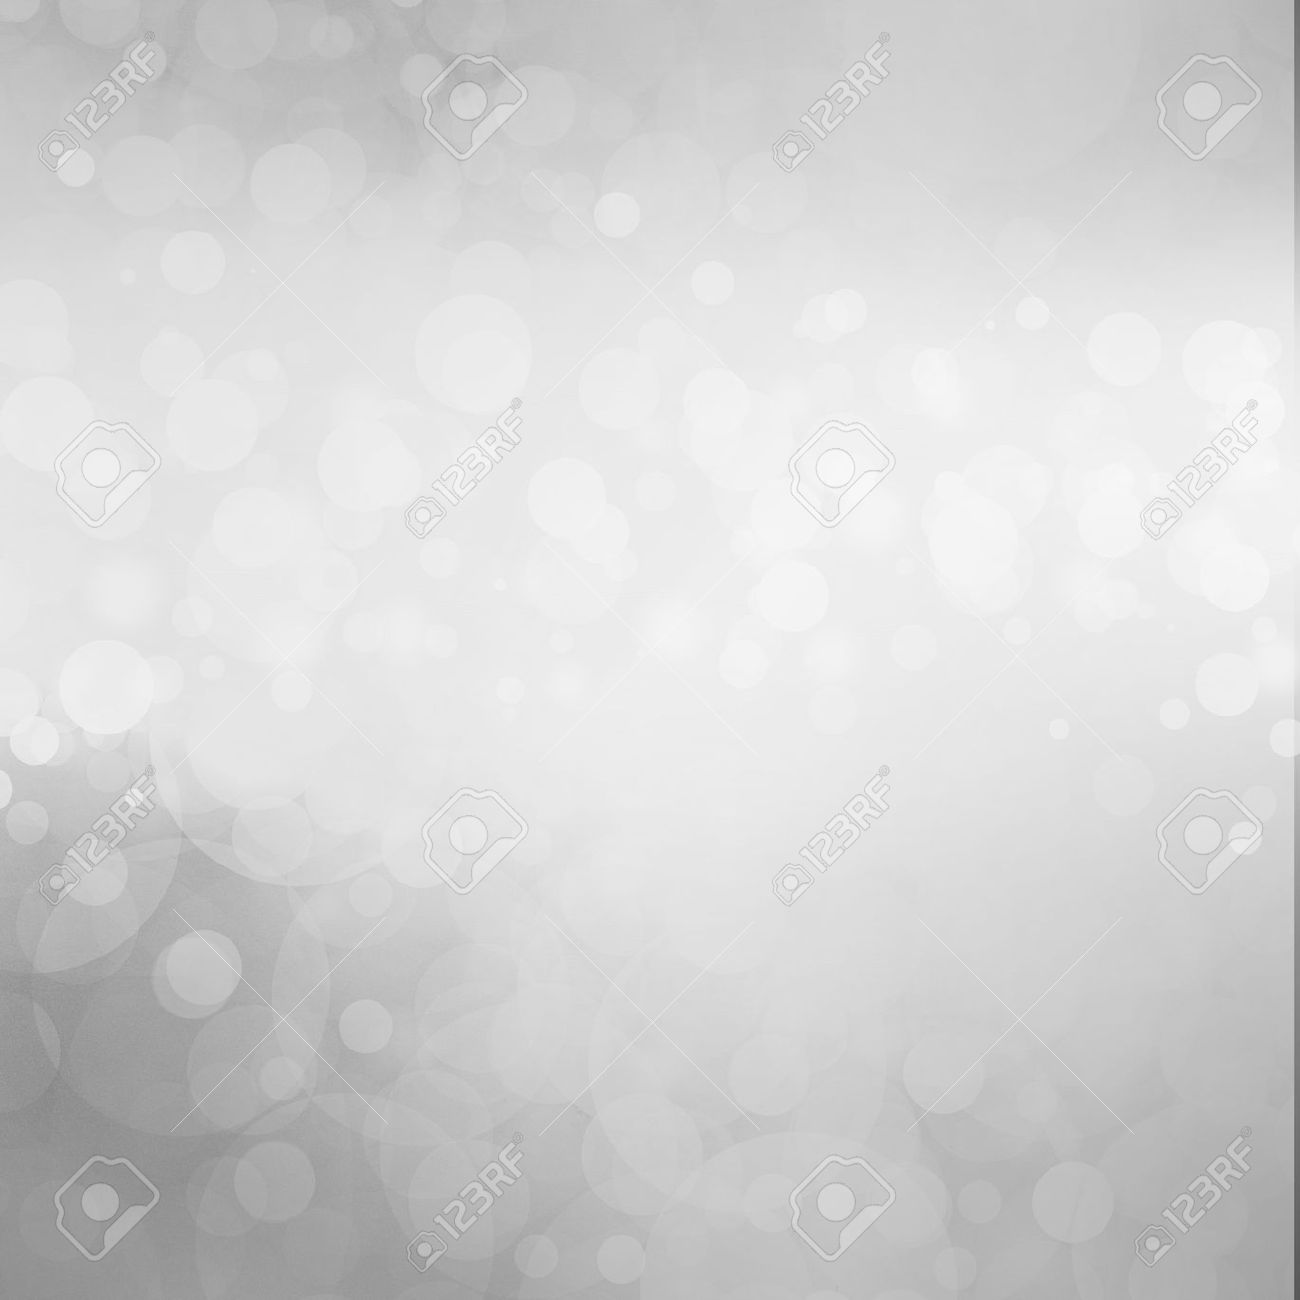 Dull Gray Black And White Background With Lights Or Circles